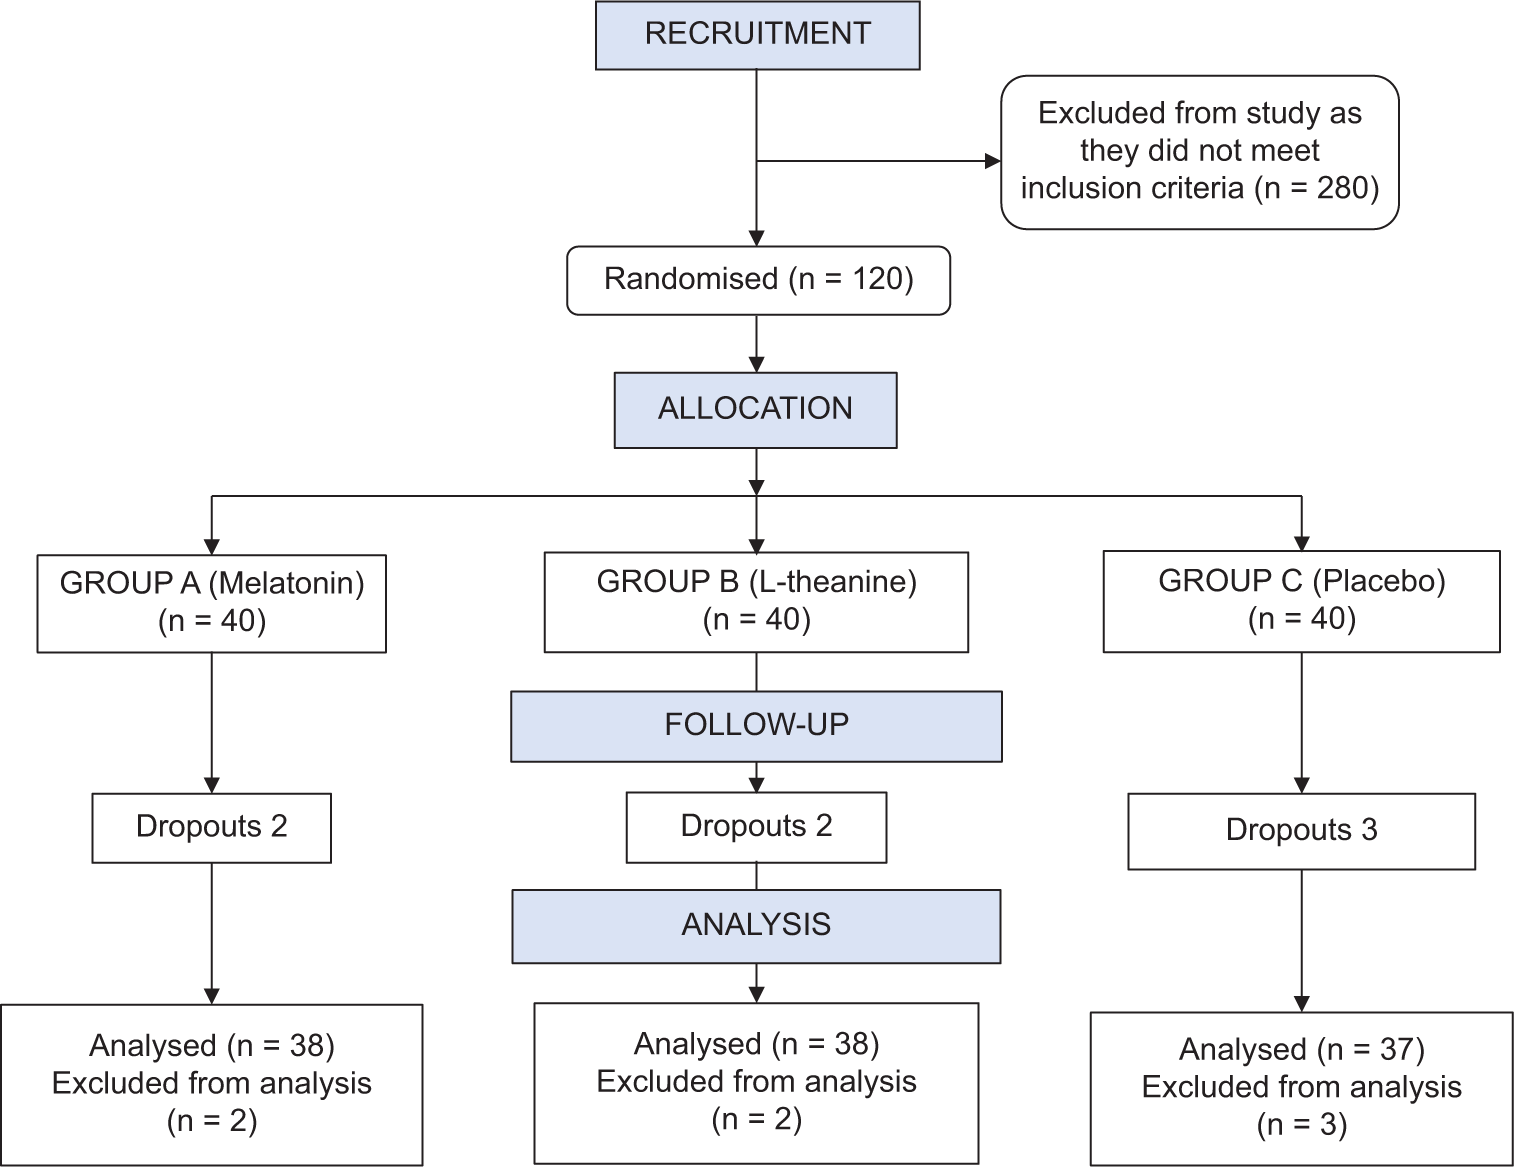 Comparison Between Efficacy of Oral Melatonin and Oral L-theanine in Improving Sleep in Cancer Patients Suffering From Insomnia: A Randomised Double-blinded Placebo-controlled Study